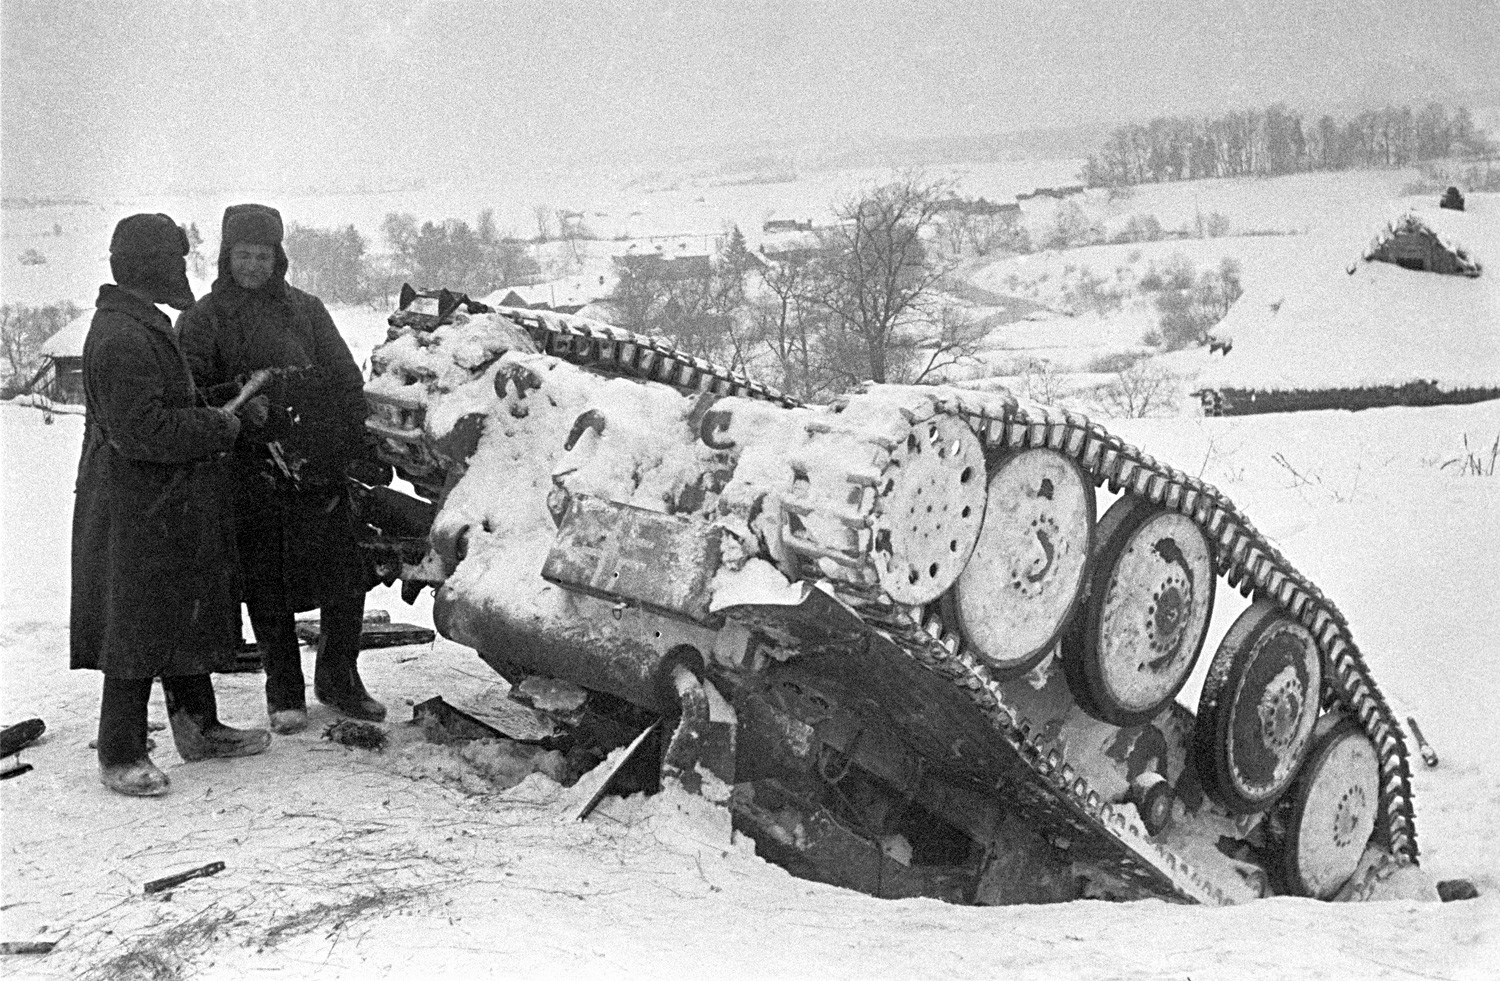 Two Soviet soldiers near a disabled Nazi tank. The Battle of Moscow.